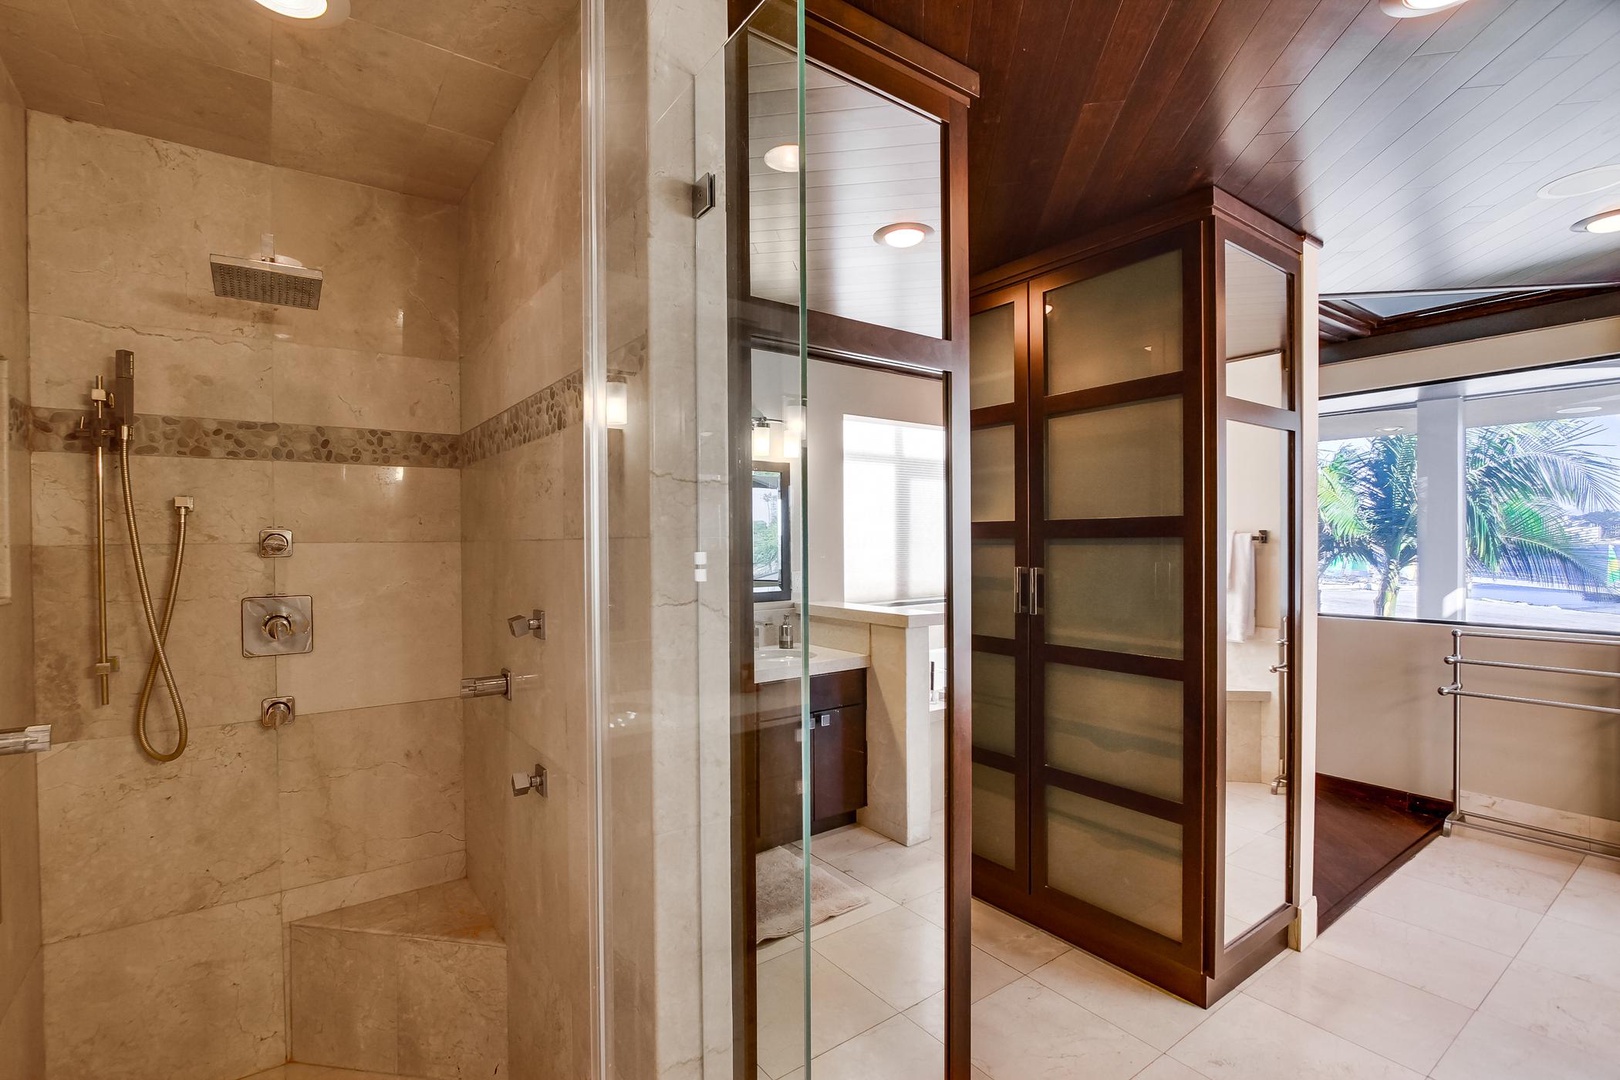 Walk-in shower and closets